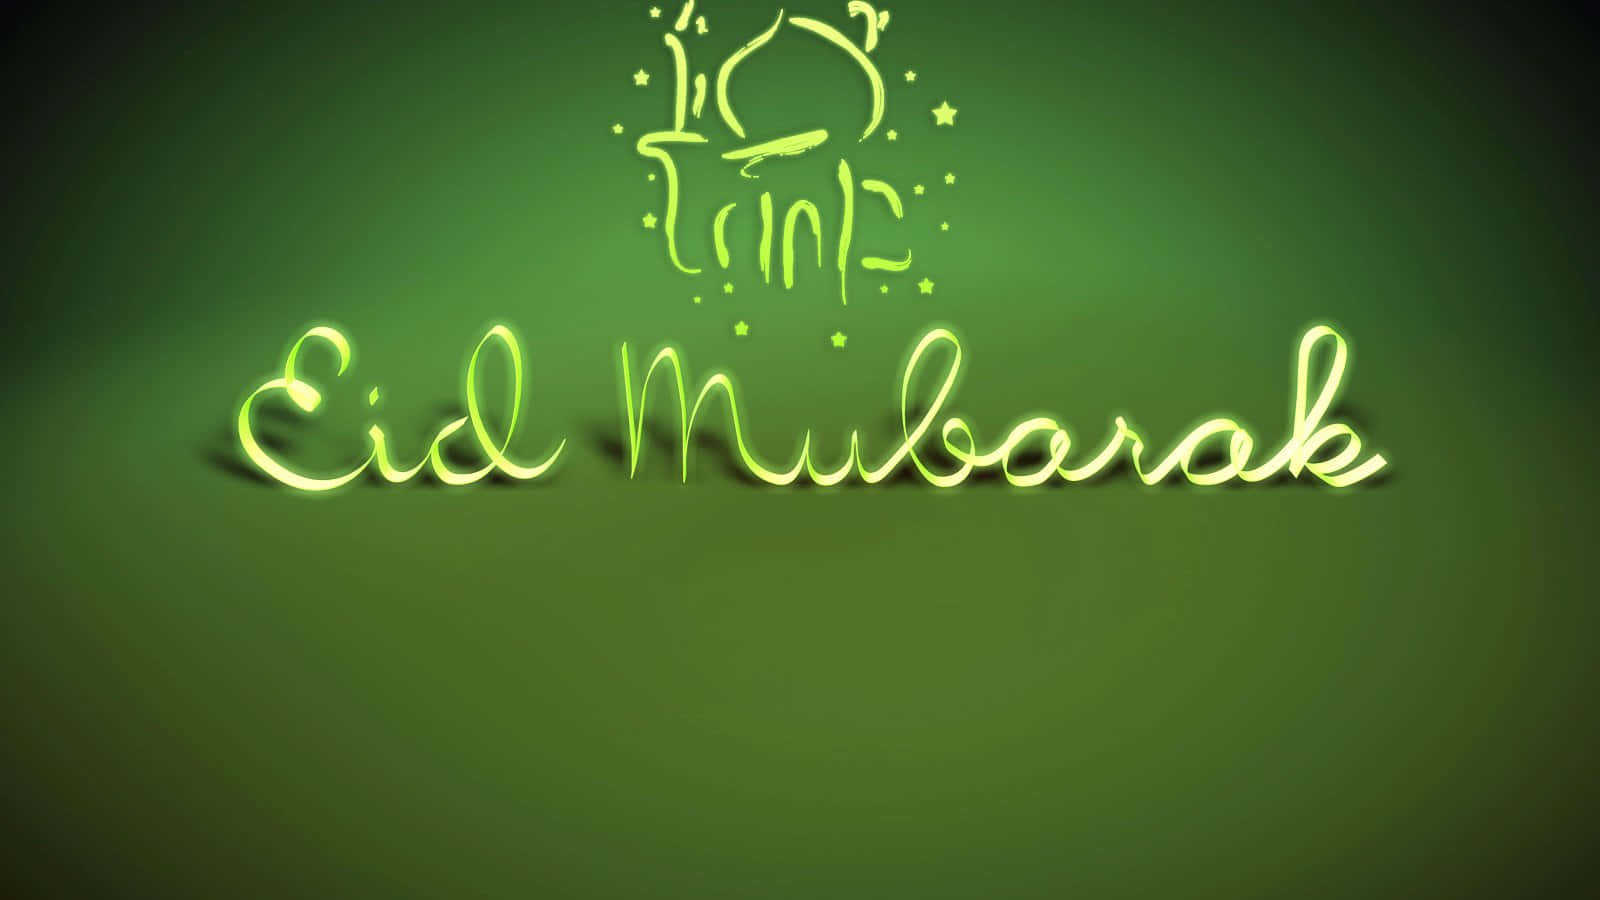 "Wish you and your family a blessed Eid Mubarak!"